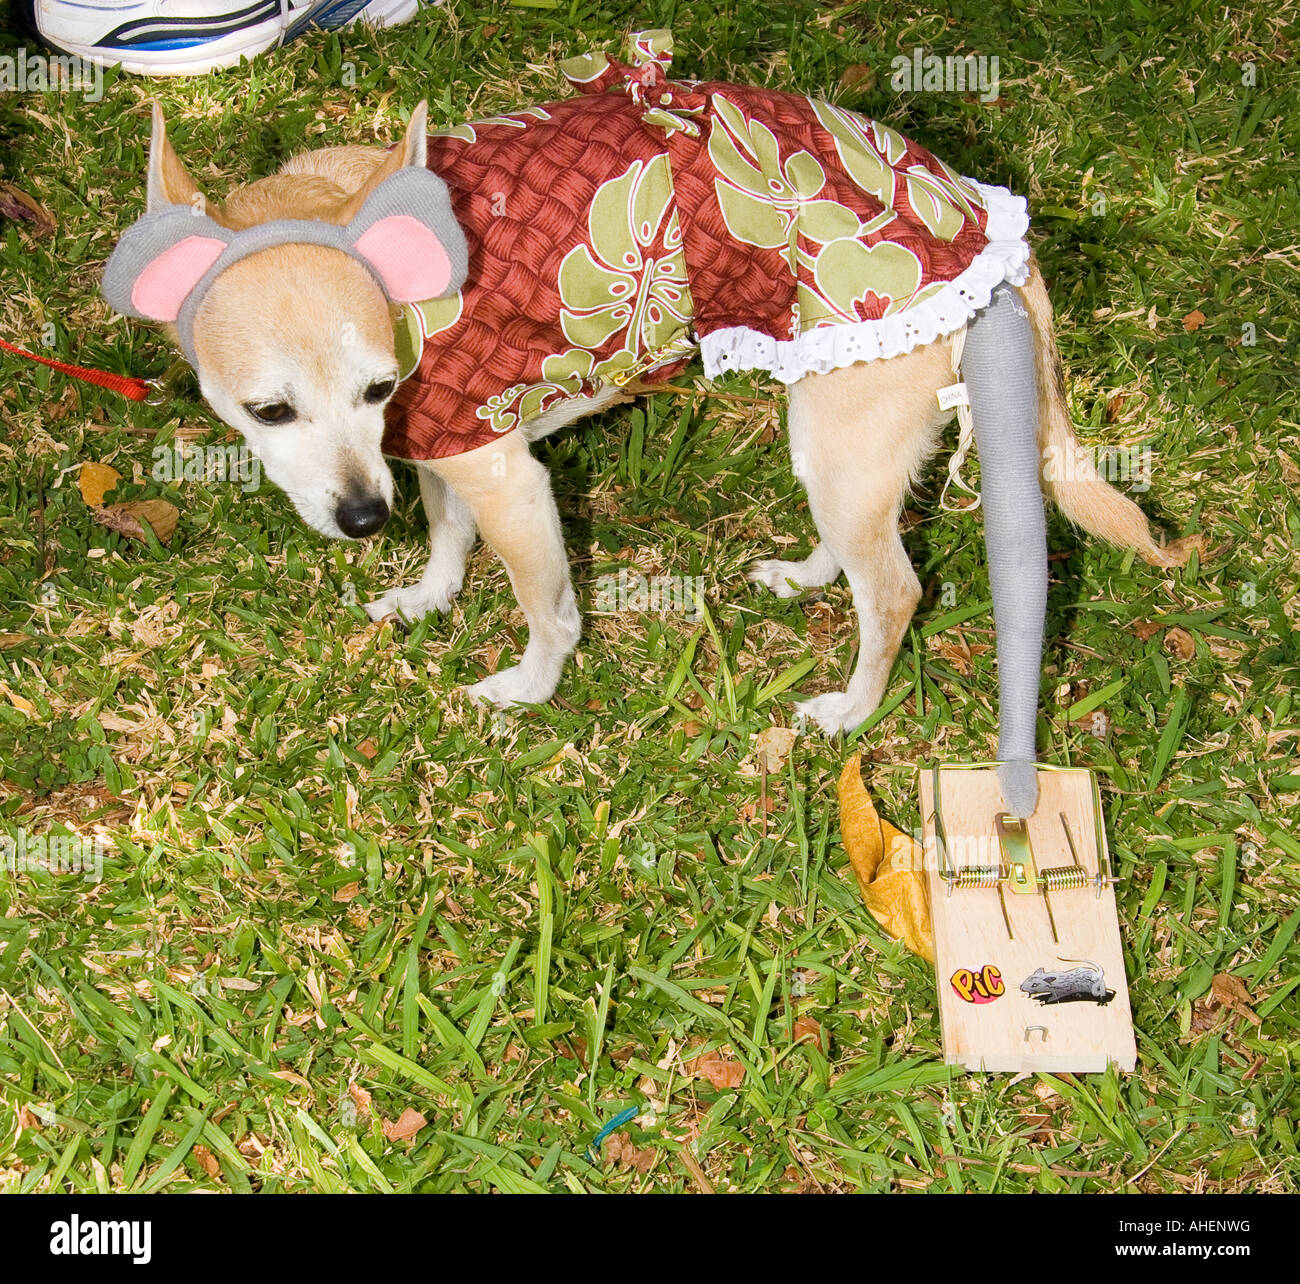 https://c8.alamy.com/comp/AHENWG/chihuahua-dog-dressed-in-mouse-or-rat-costume-with-tail-caught-in-AHENWG.jpg